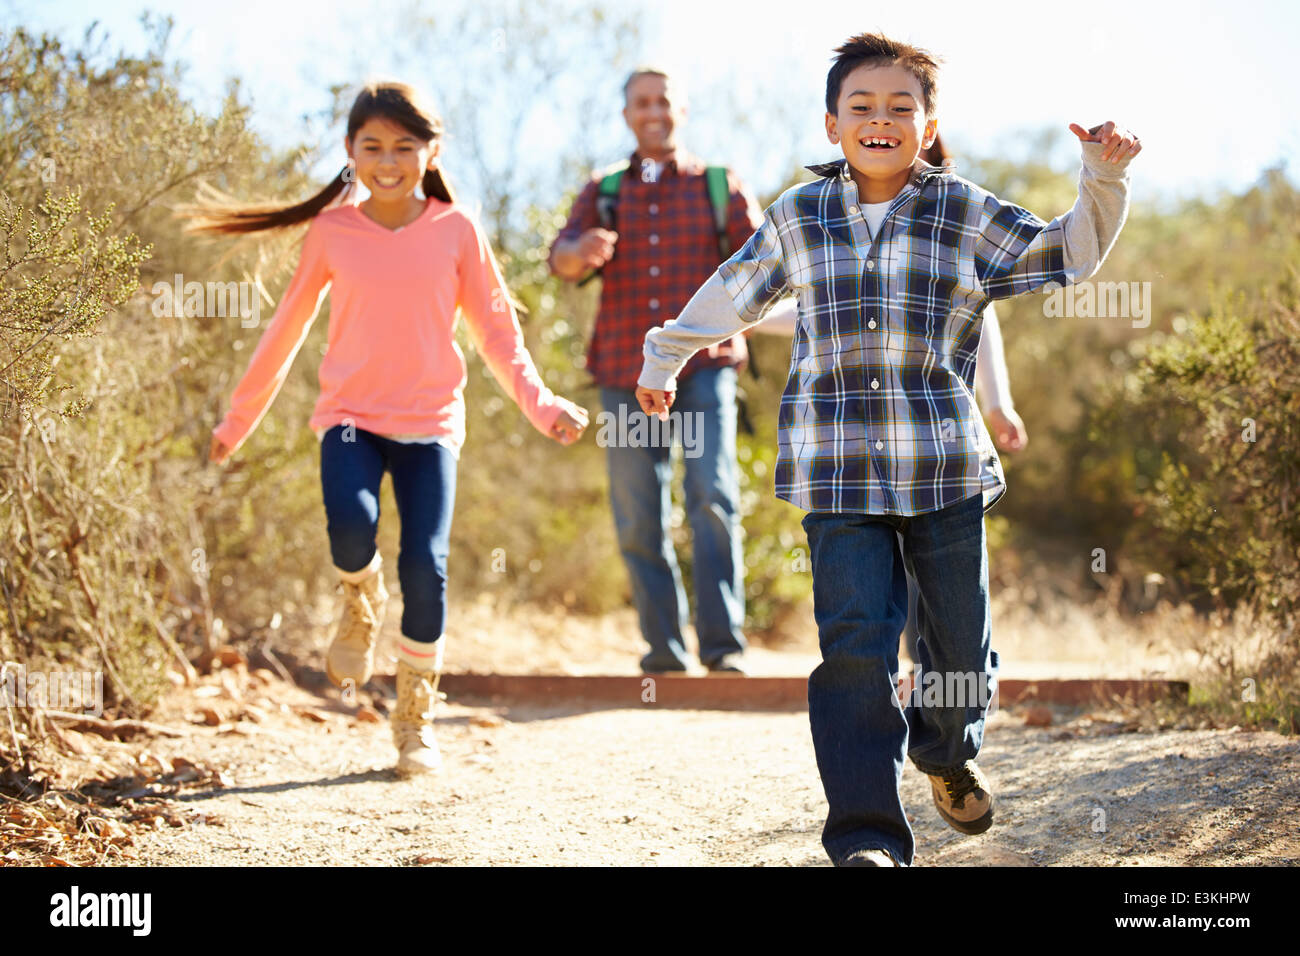 Father And Children Hiking In Countryside Wearing Backpacks Stock Photo